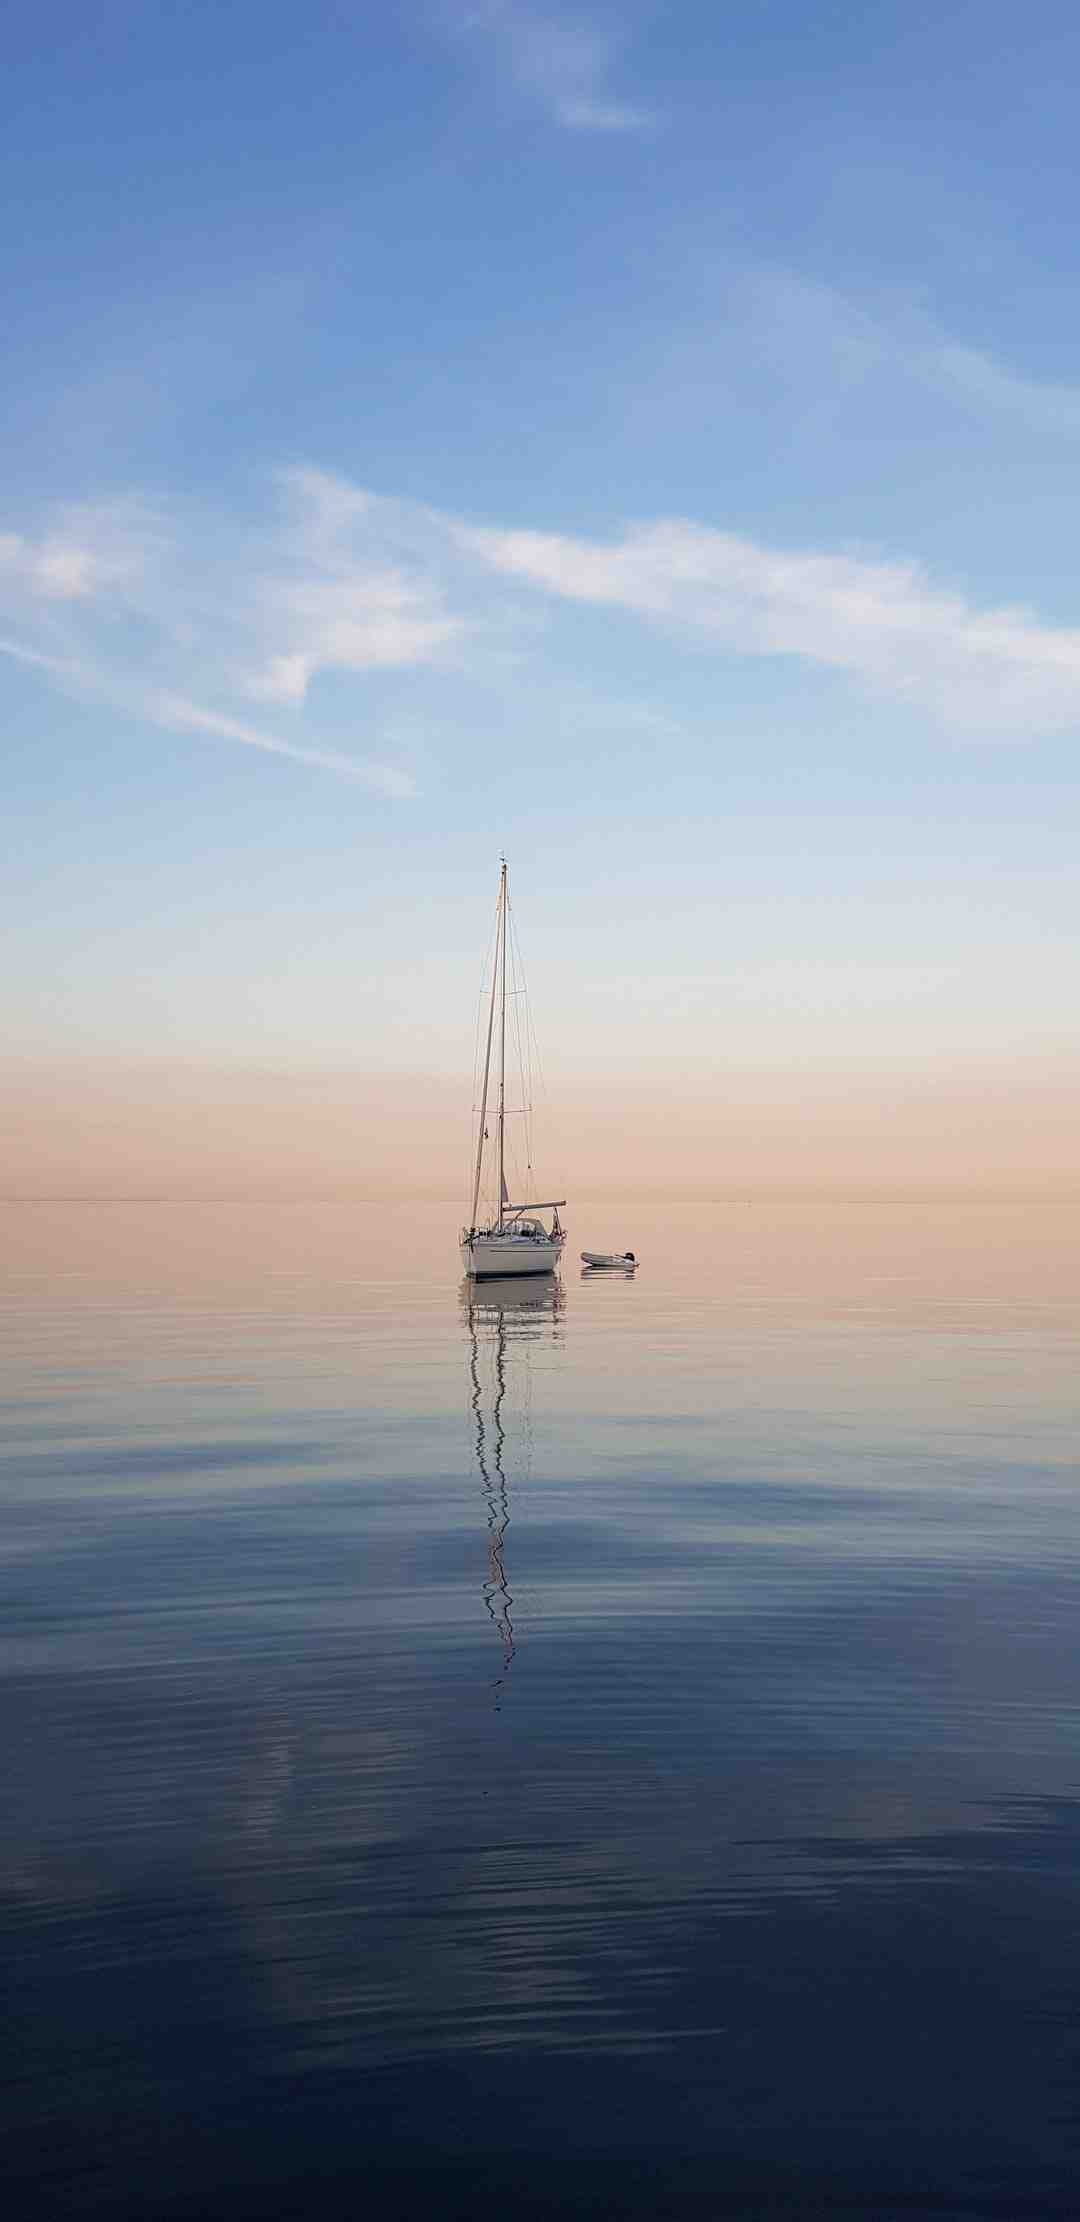 How to prepare for your world tour by sailboat?